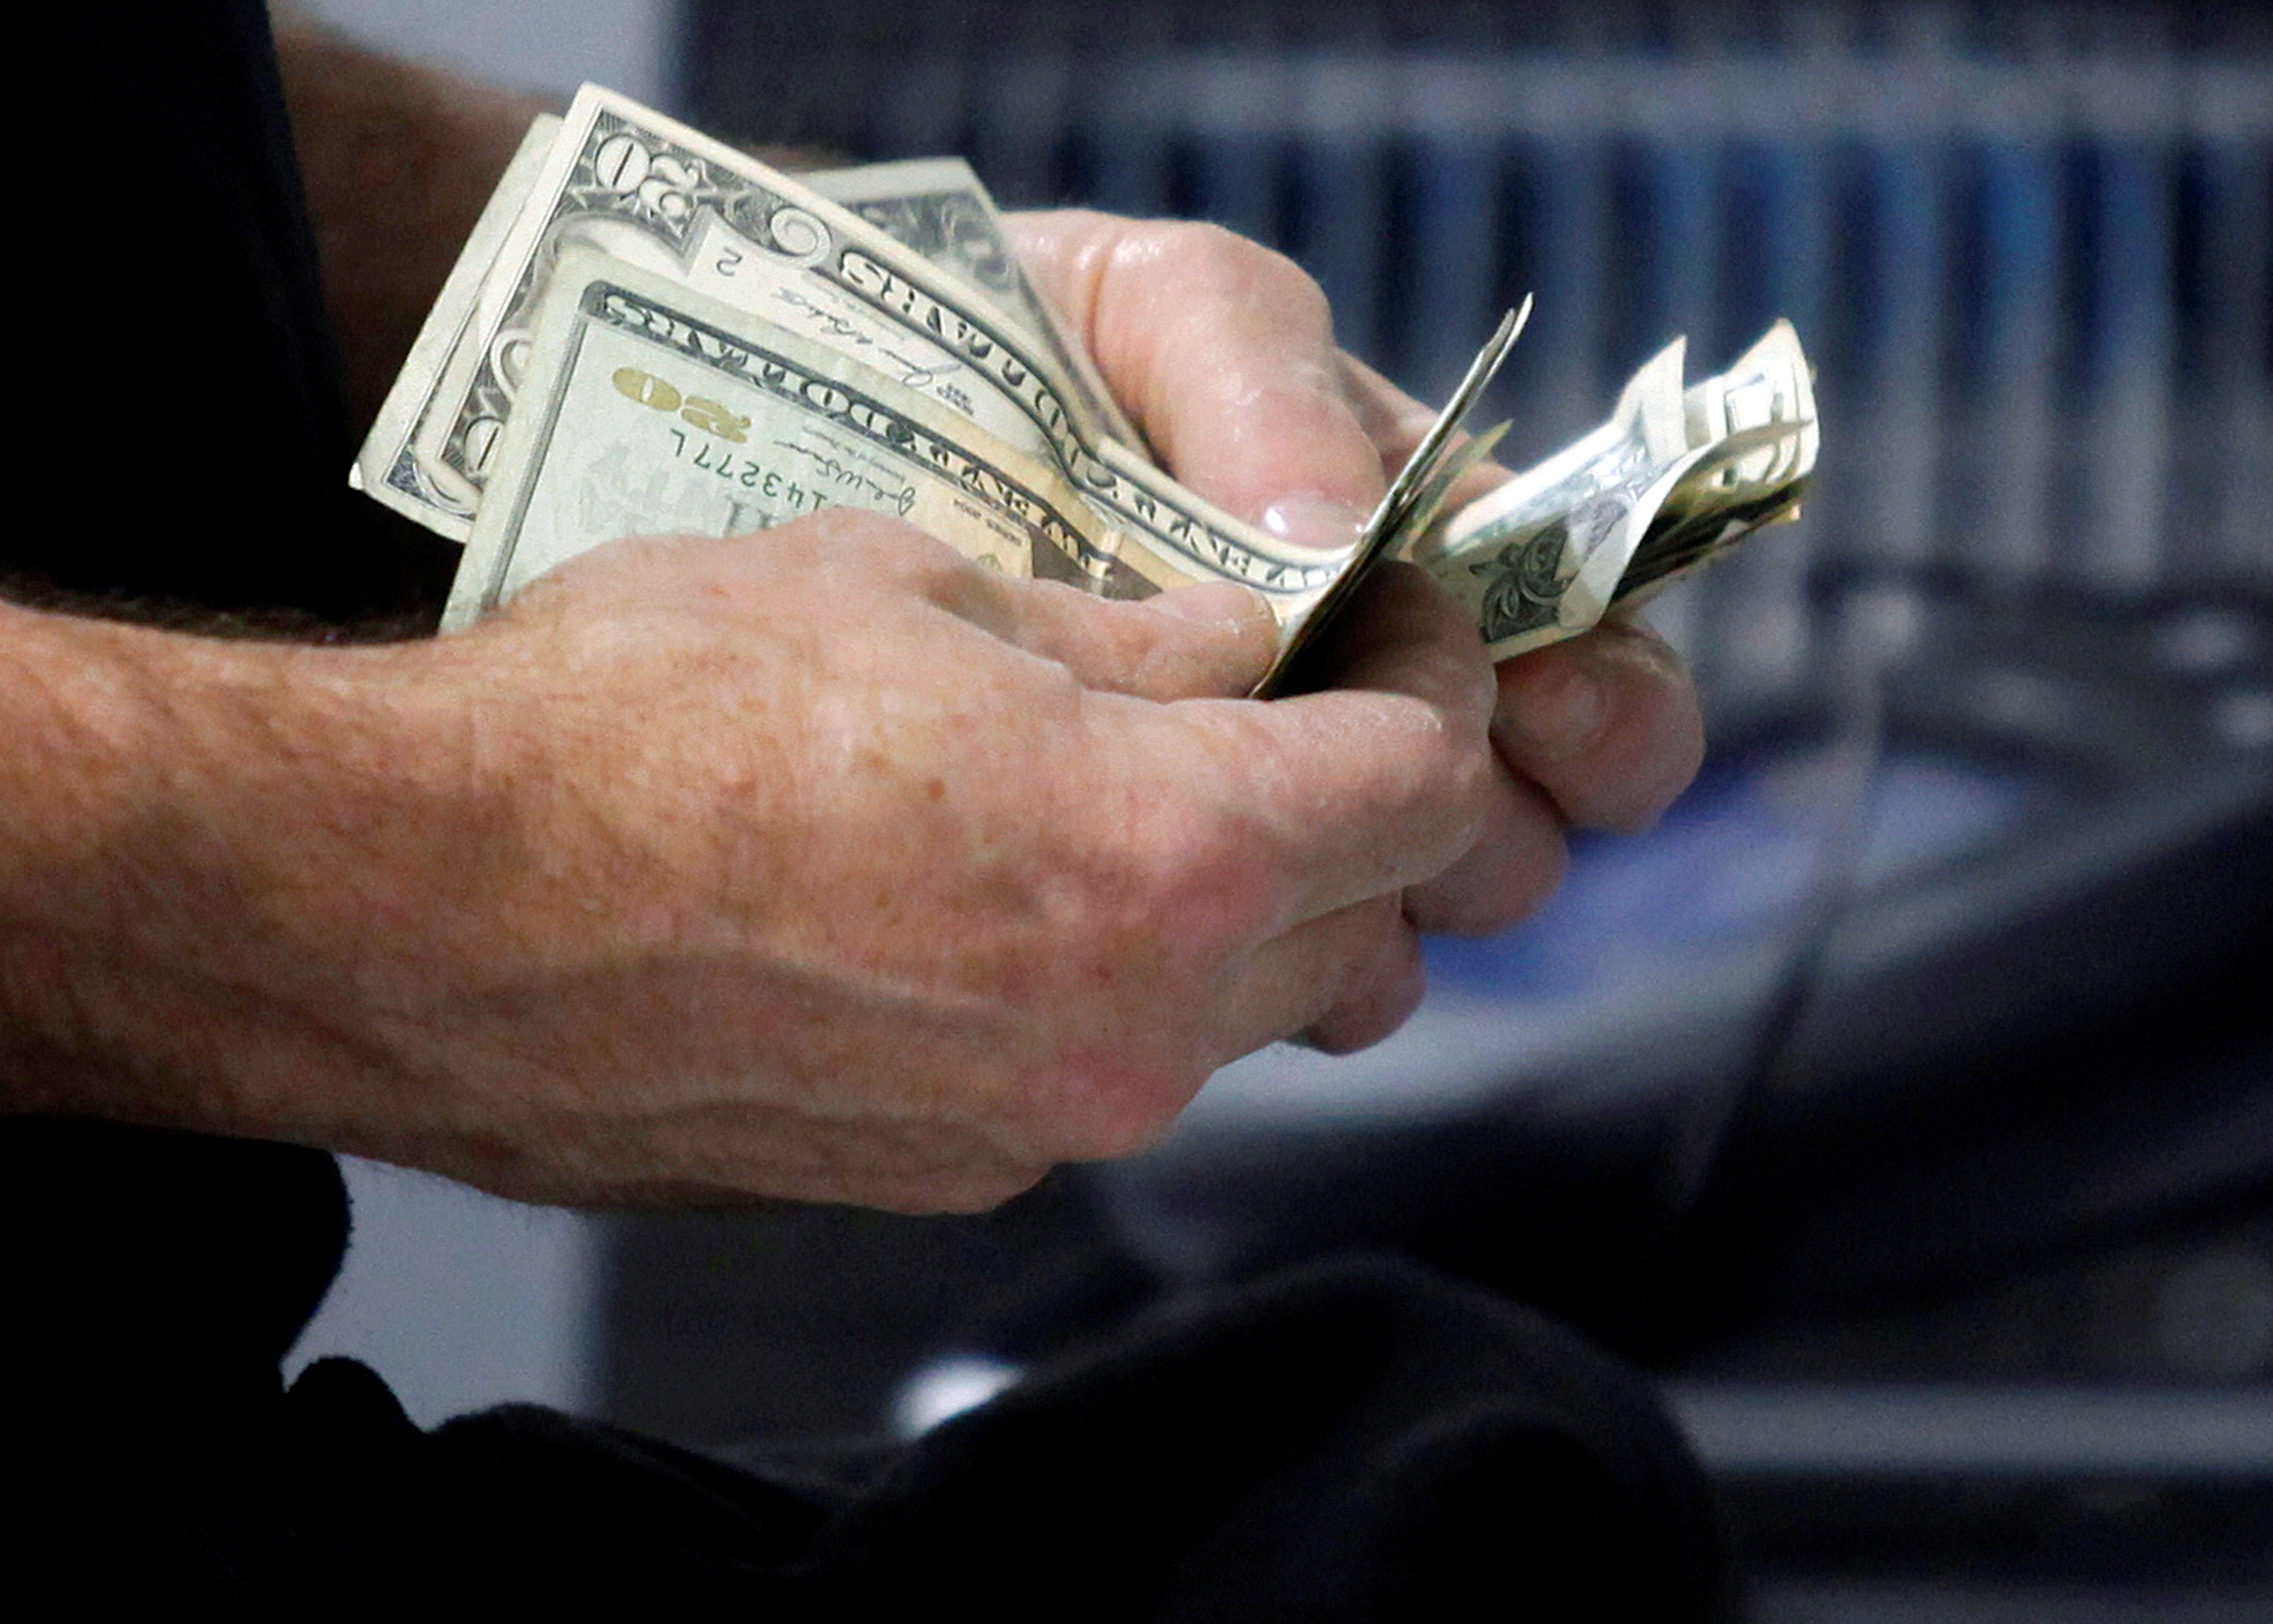 FILE PHOTO: A customer counts his cash at the register while purchasing an item at a Best Buy store in Flushing